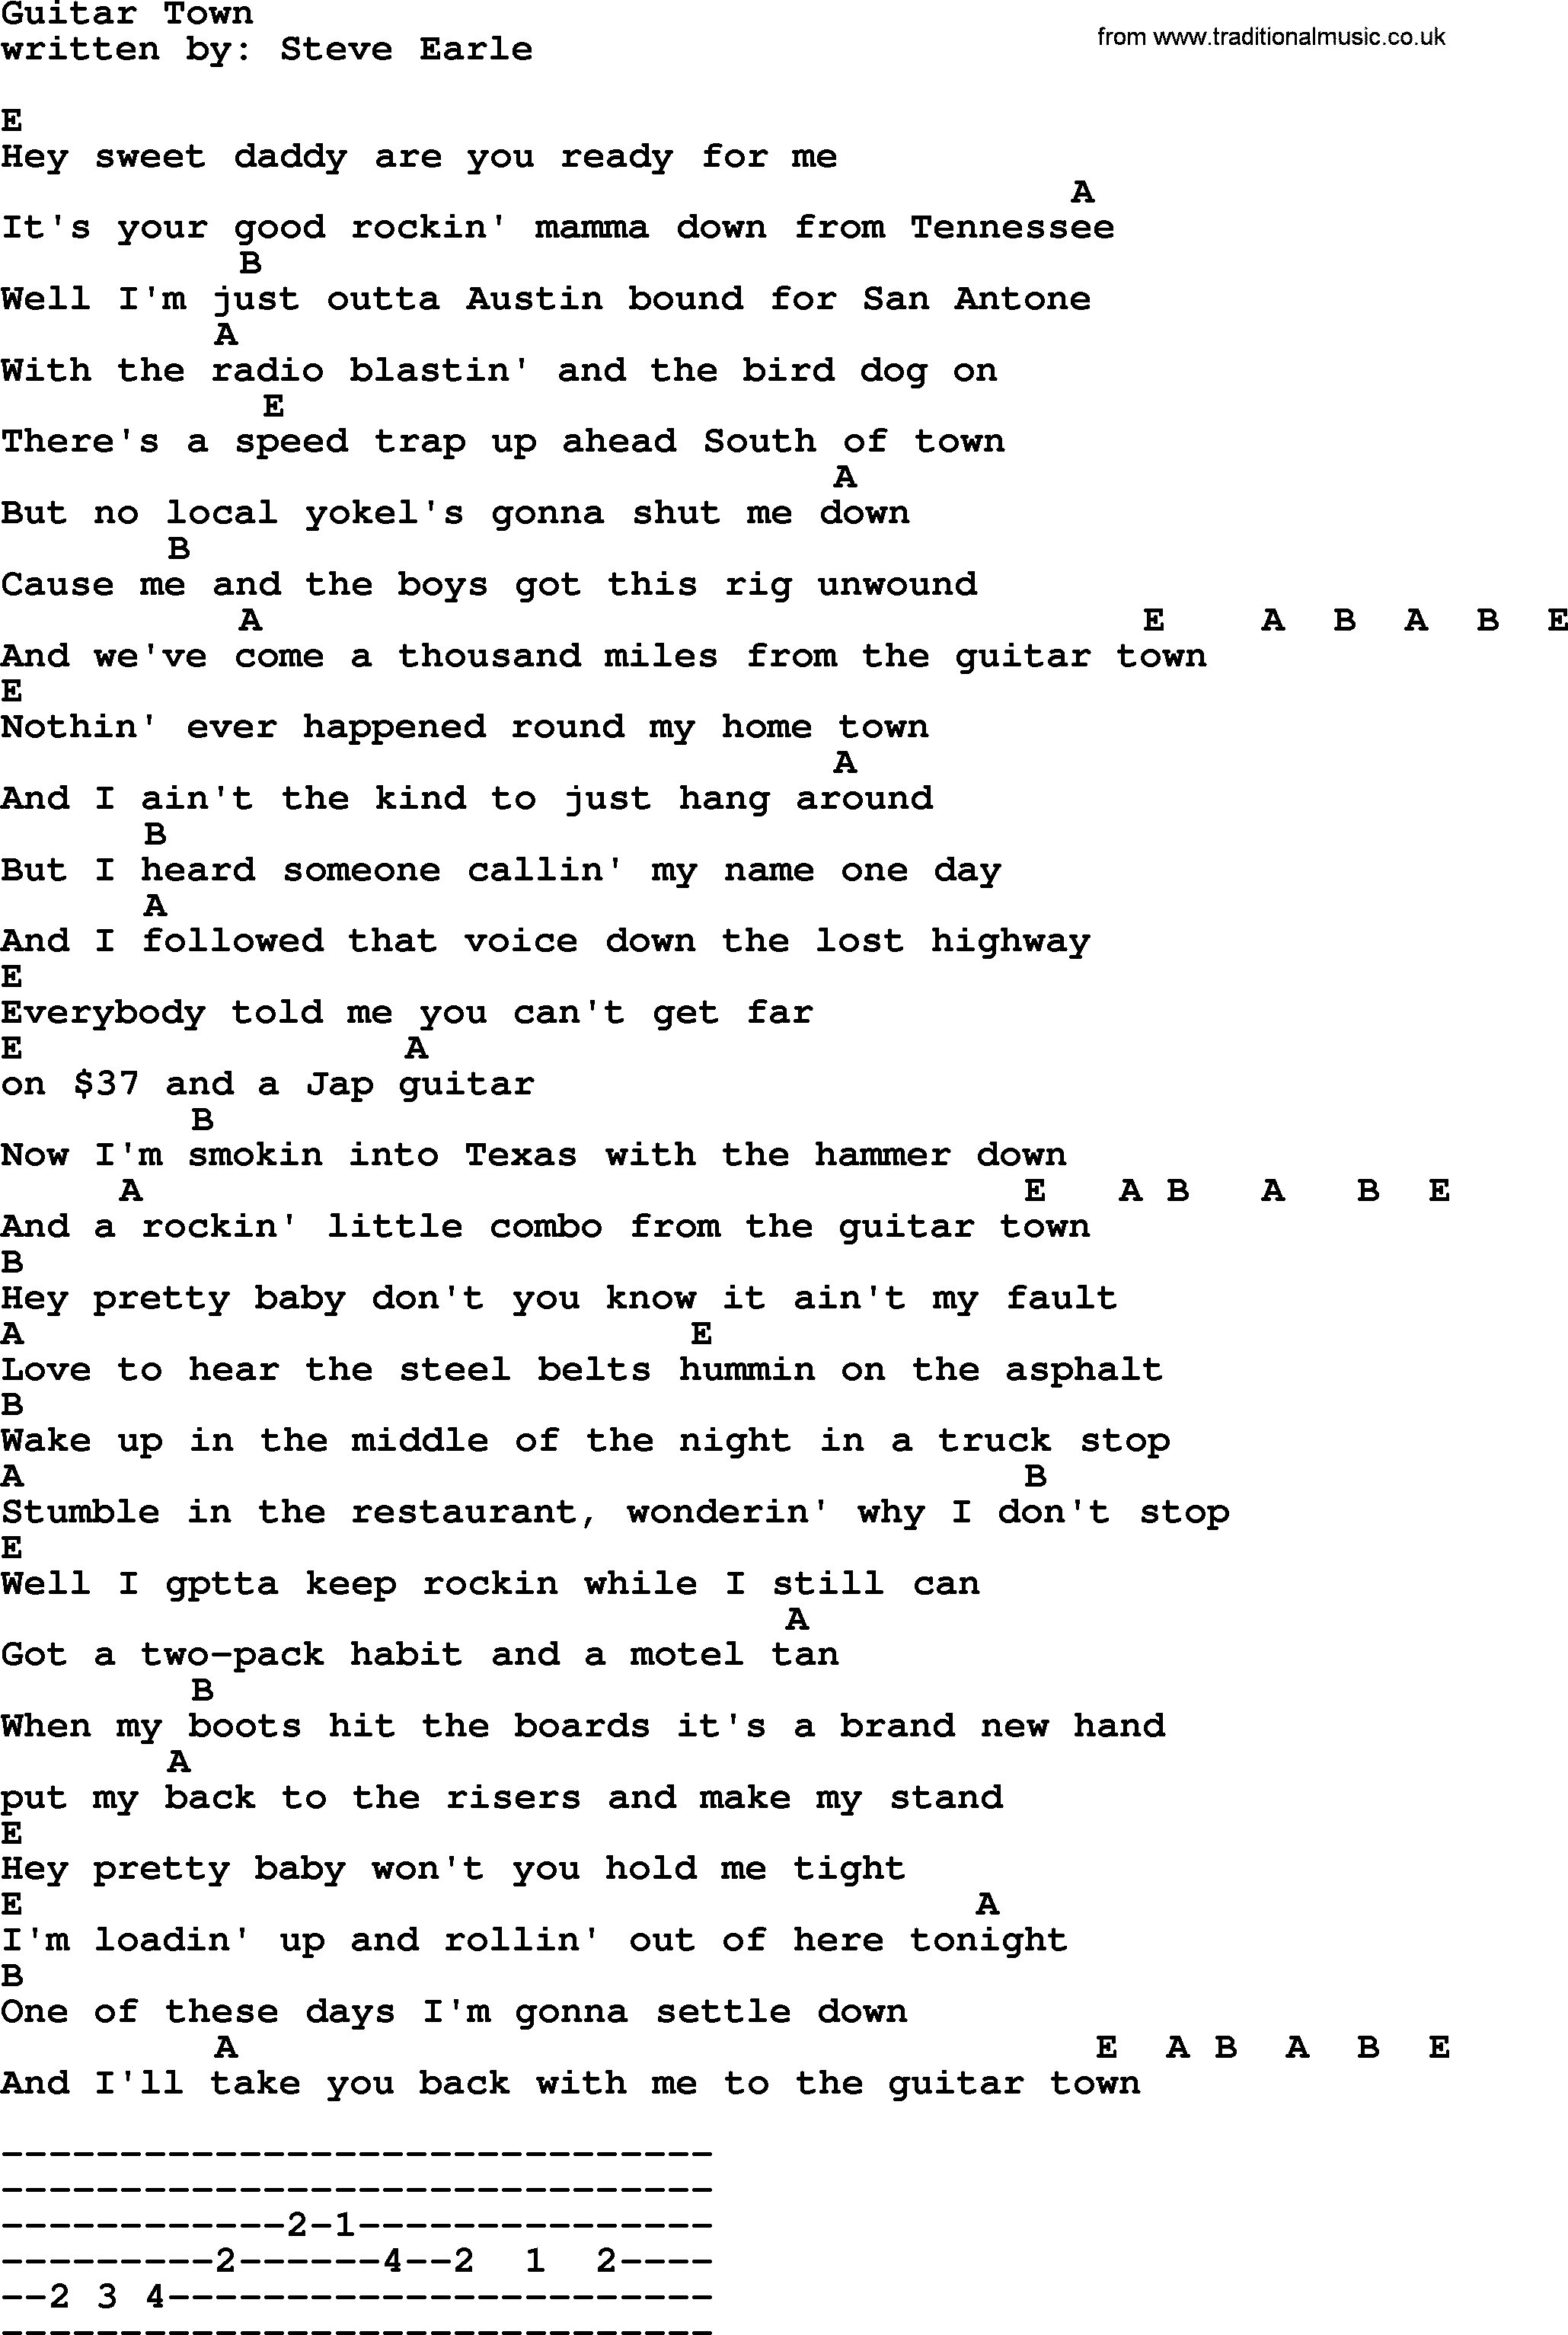 Lost Boy Chords Emmylou Harris Song Guitar Town Lyrics And Chords